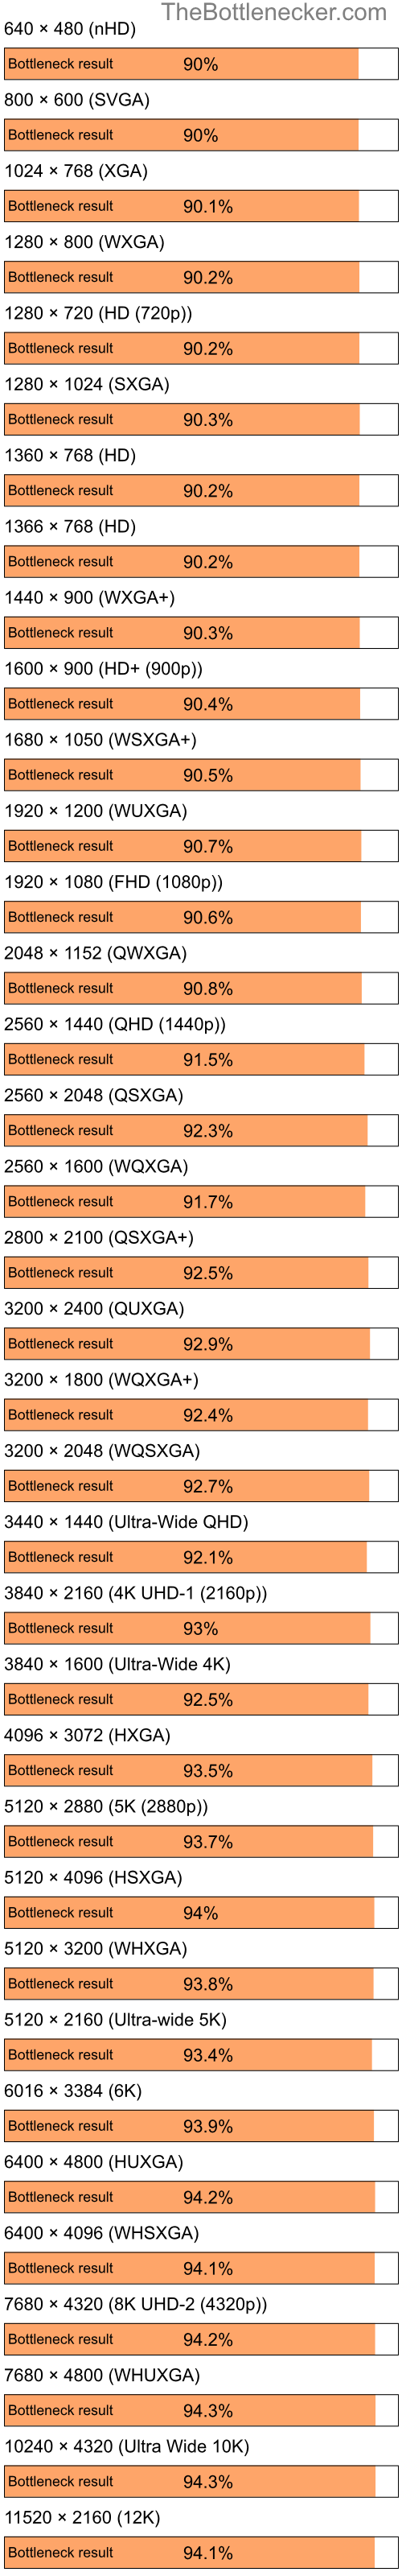 Bottleneck results by resolution for Intel Celeron M 410 and NVIDIA GeForce4 MX 420 in7 Days to Die